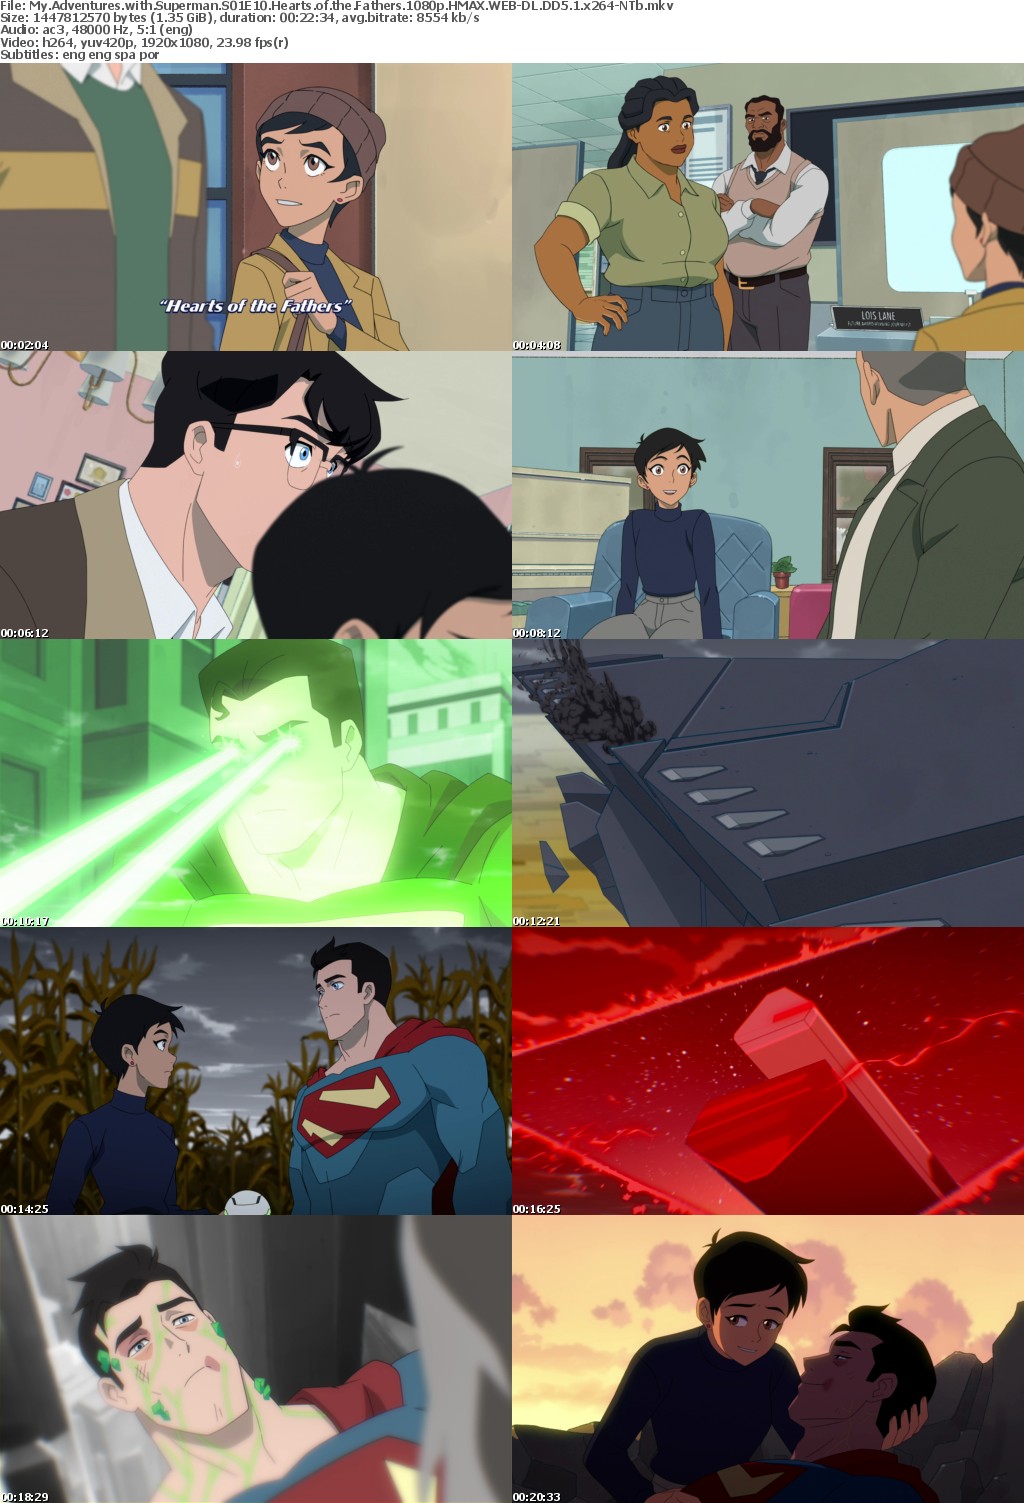 My Adventures with Superman S01E10 Hearts of the Fathers 1080p HMAX WEB-DL DD5 1 x264-NTb